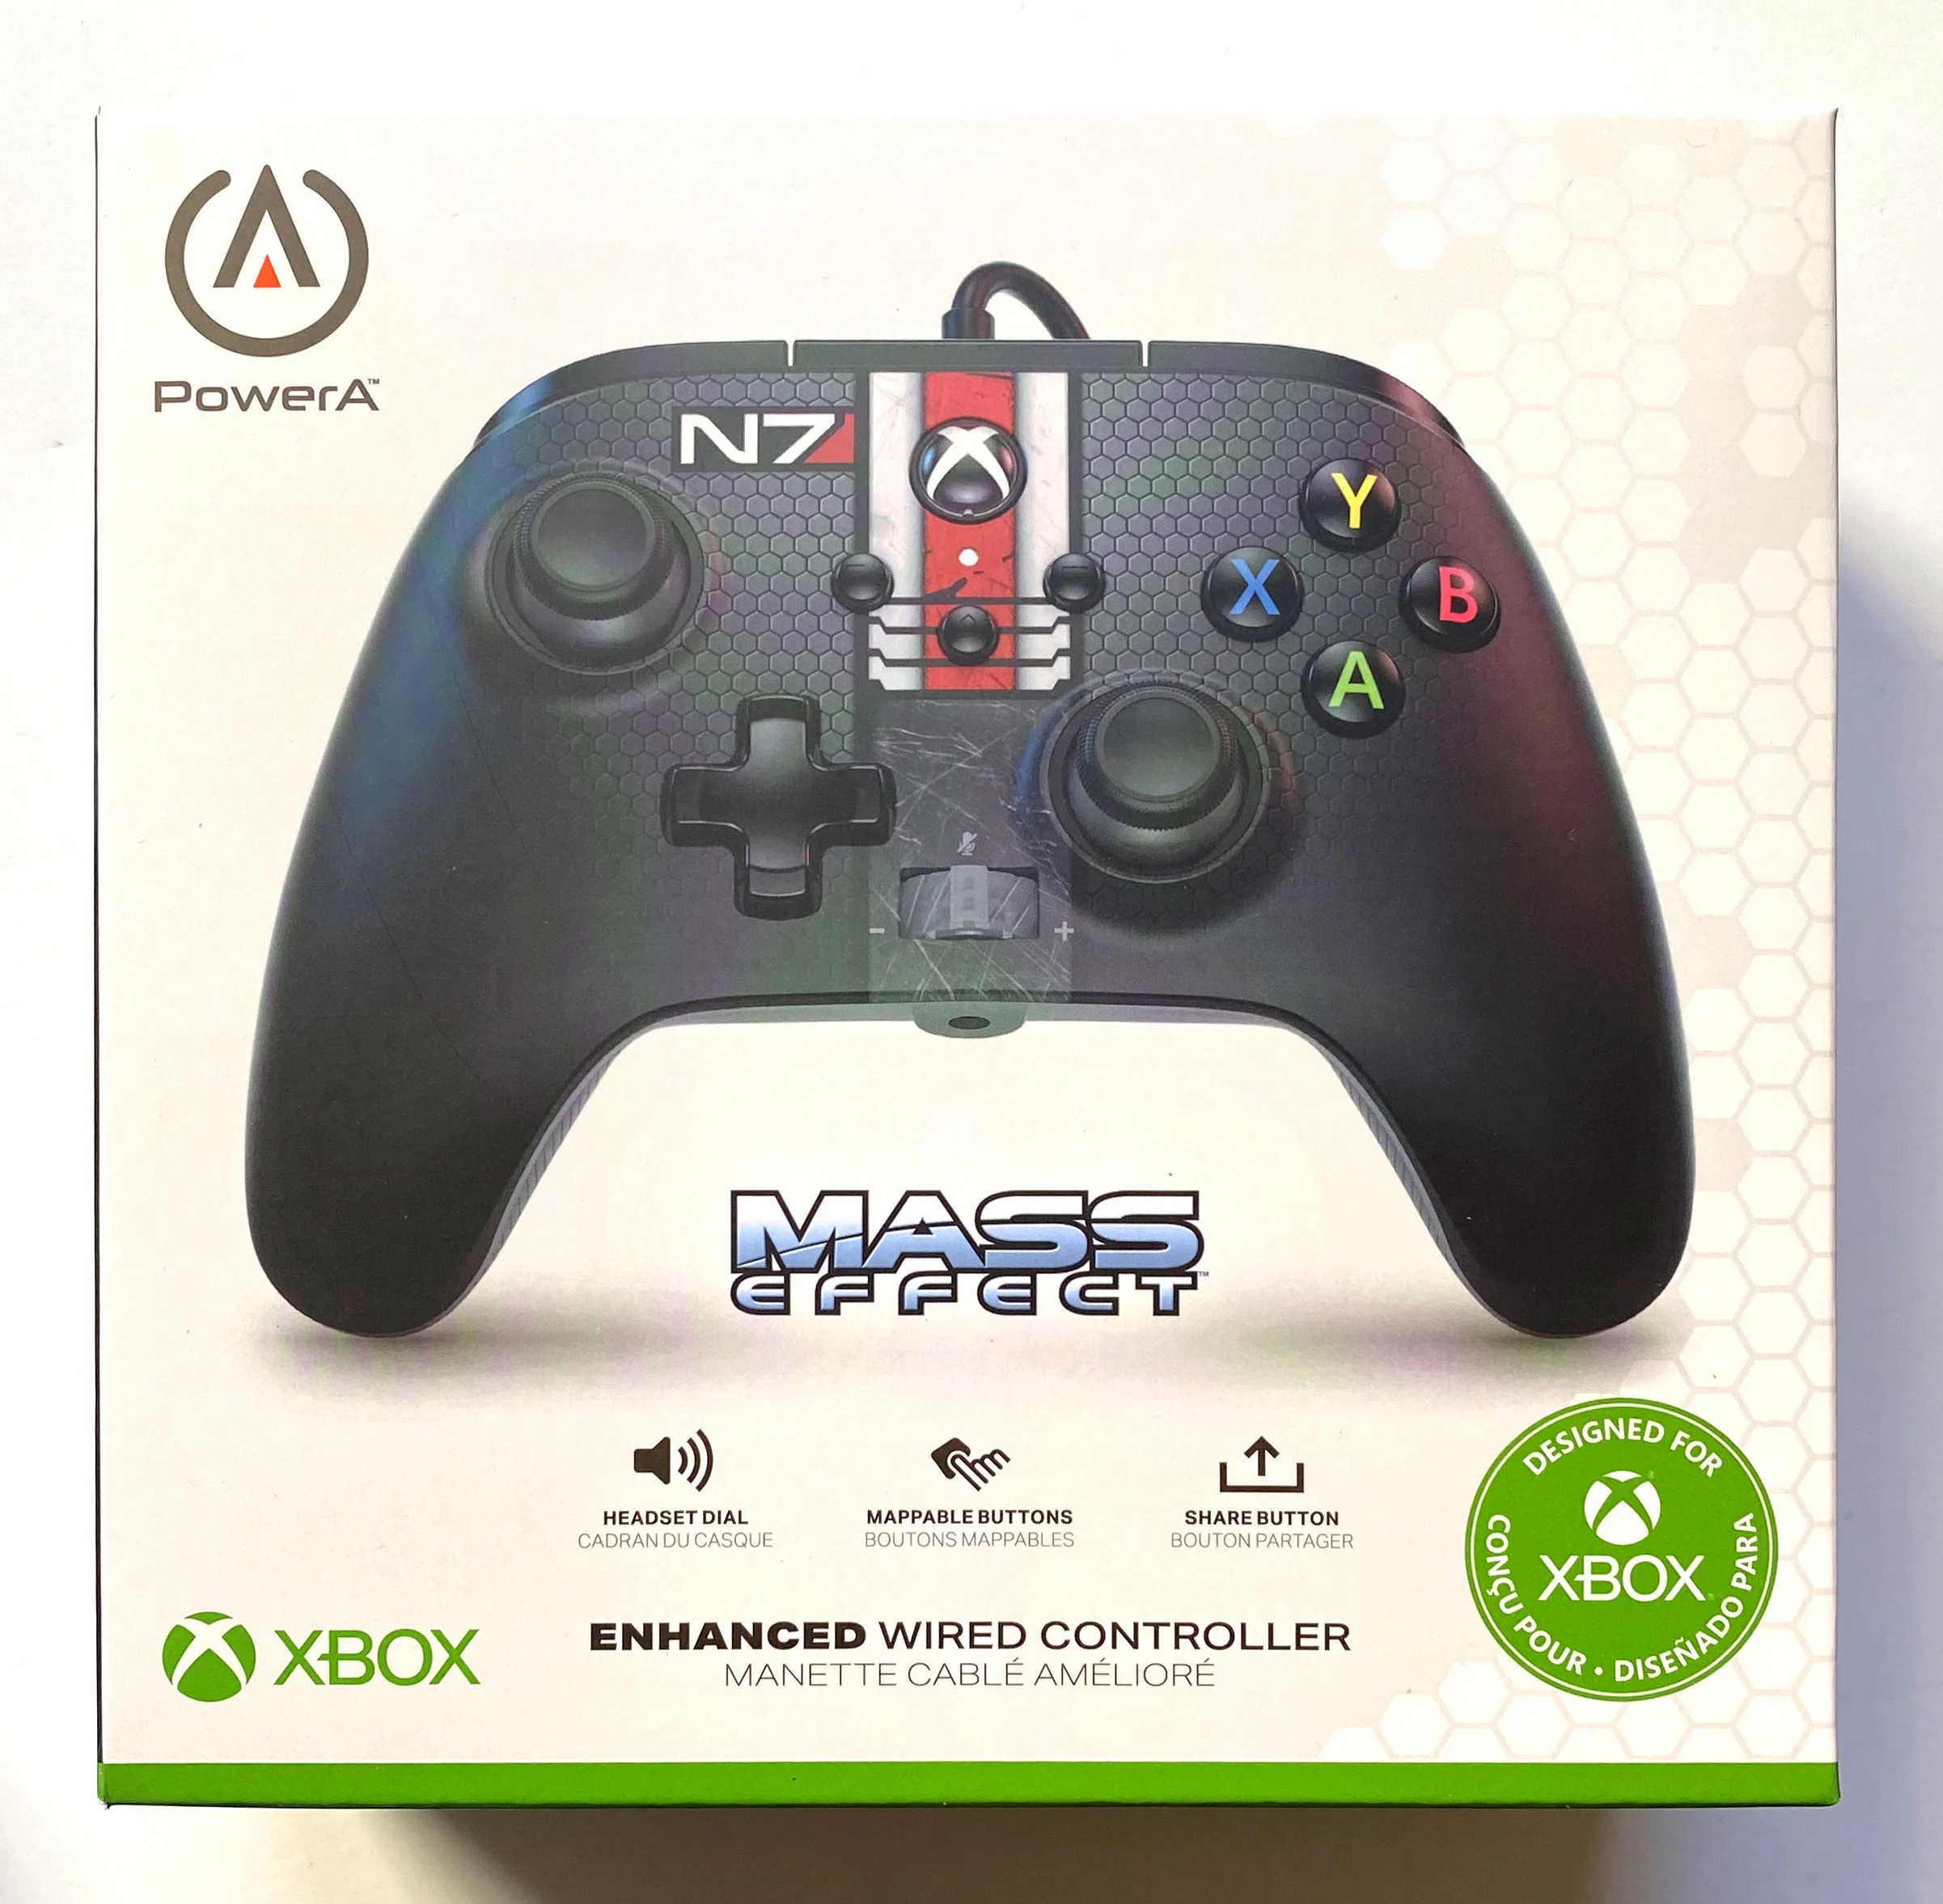  Power A Xbox Series X Mass Effect Wired Controller